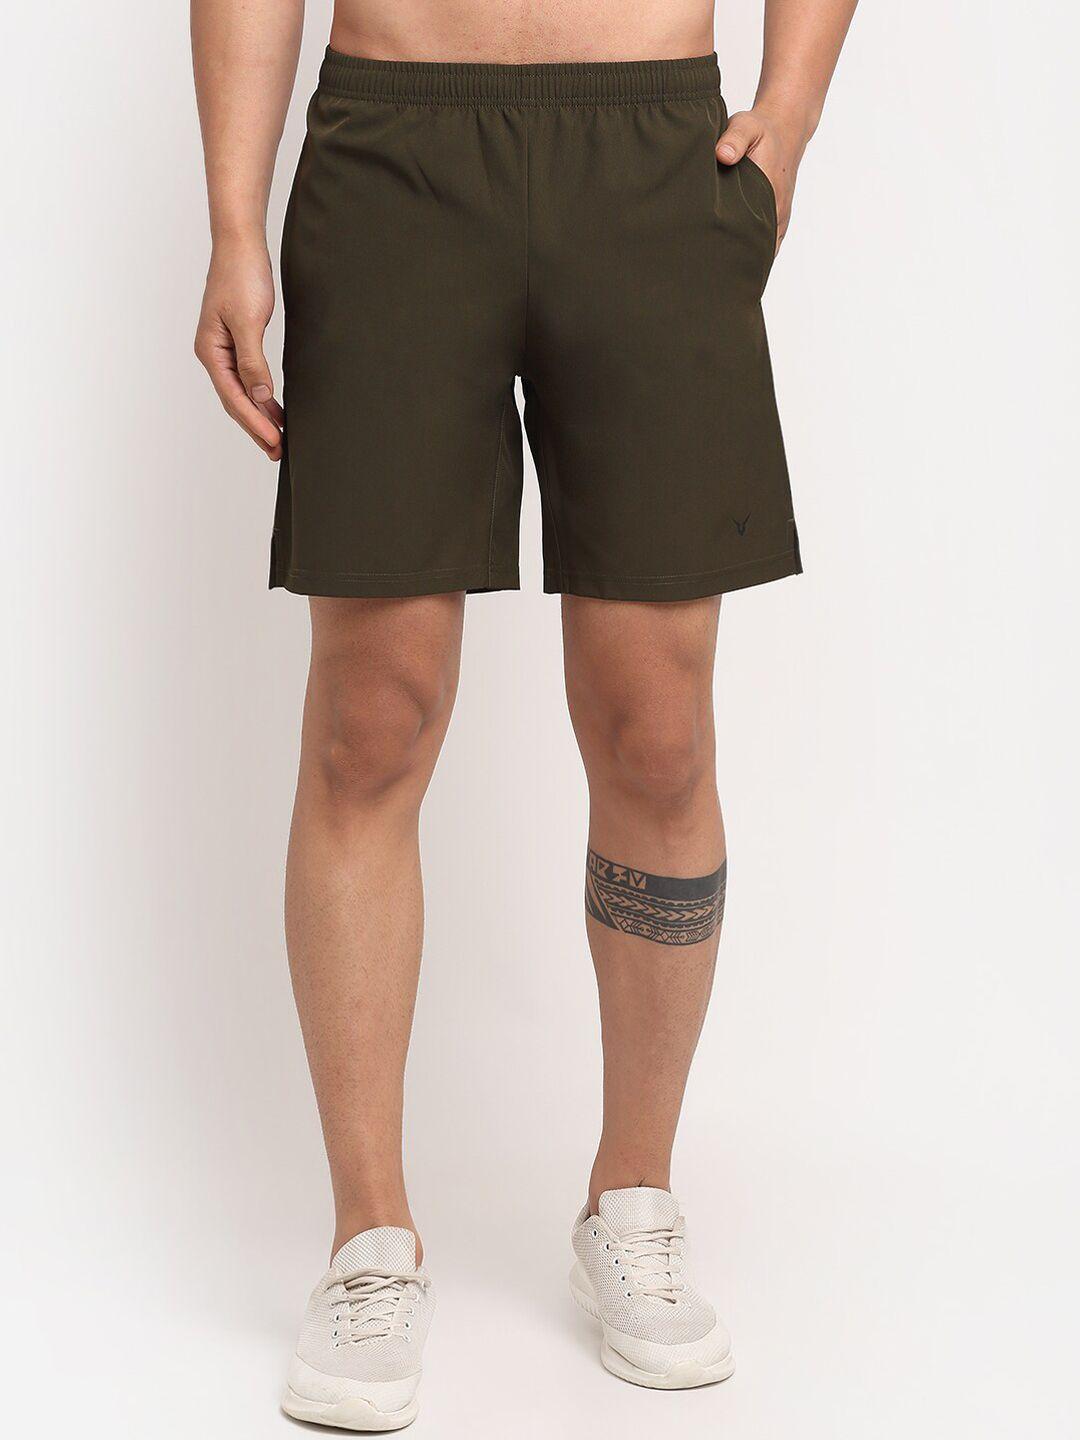 invincible men olive green training or gym sports shorts